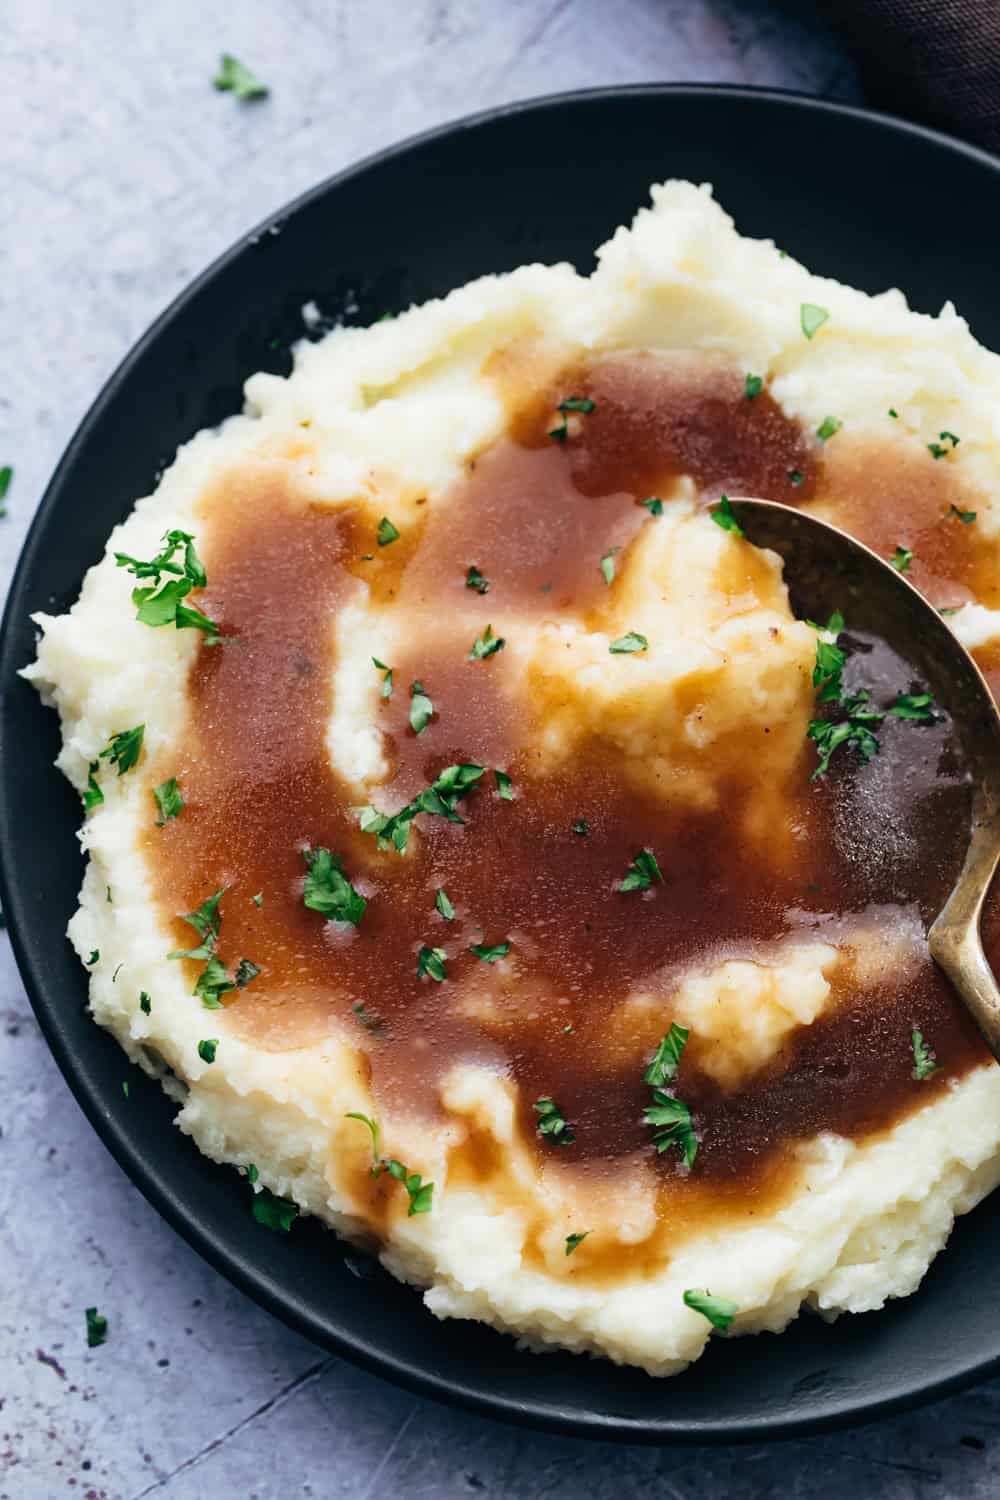 Brown vegetarian gravy poured over mashed potatoes